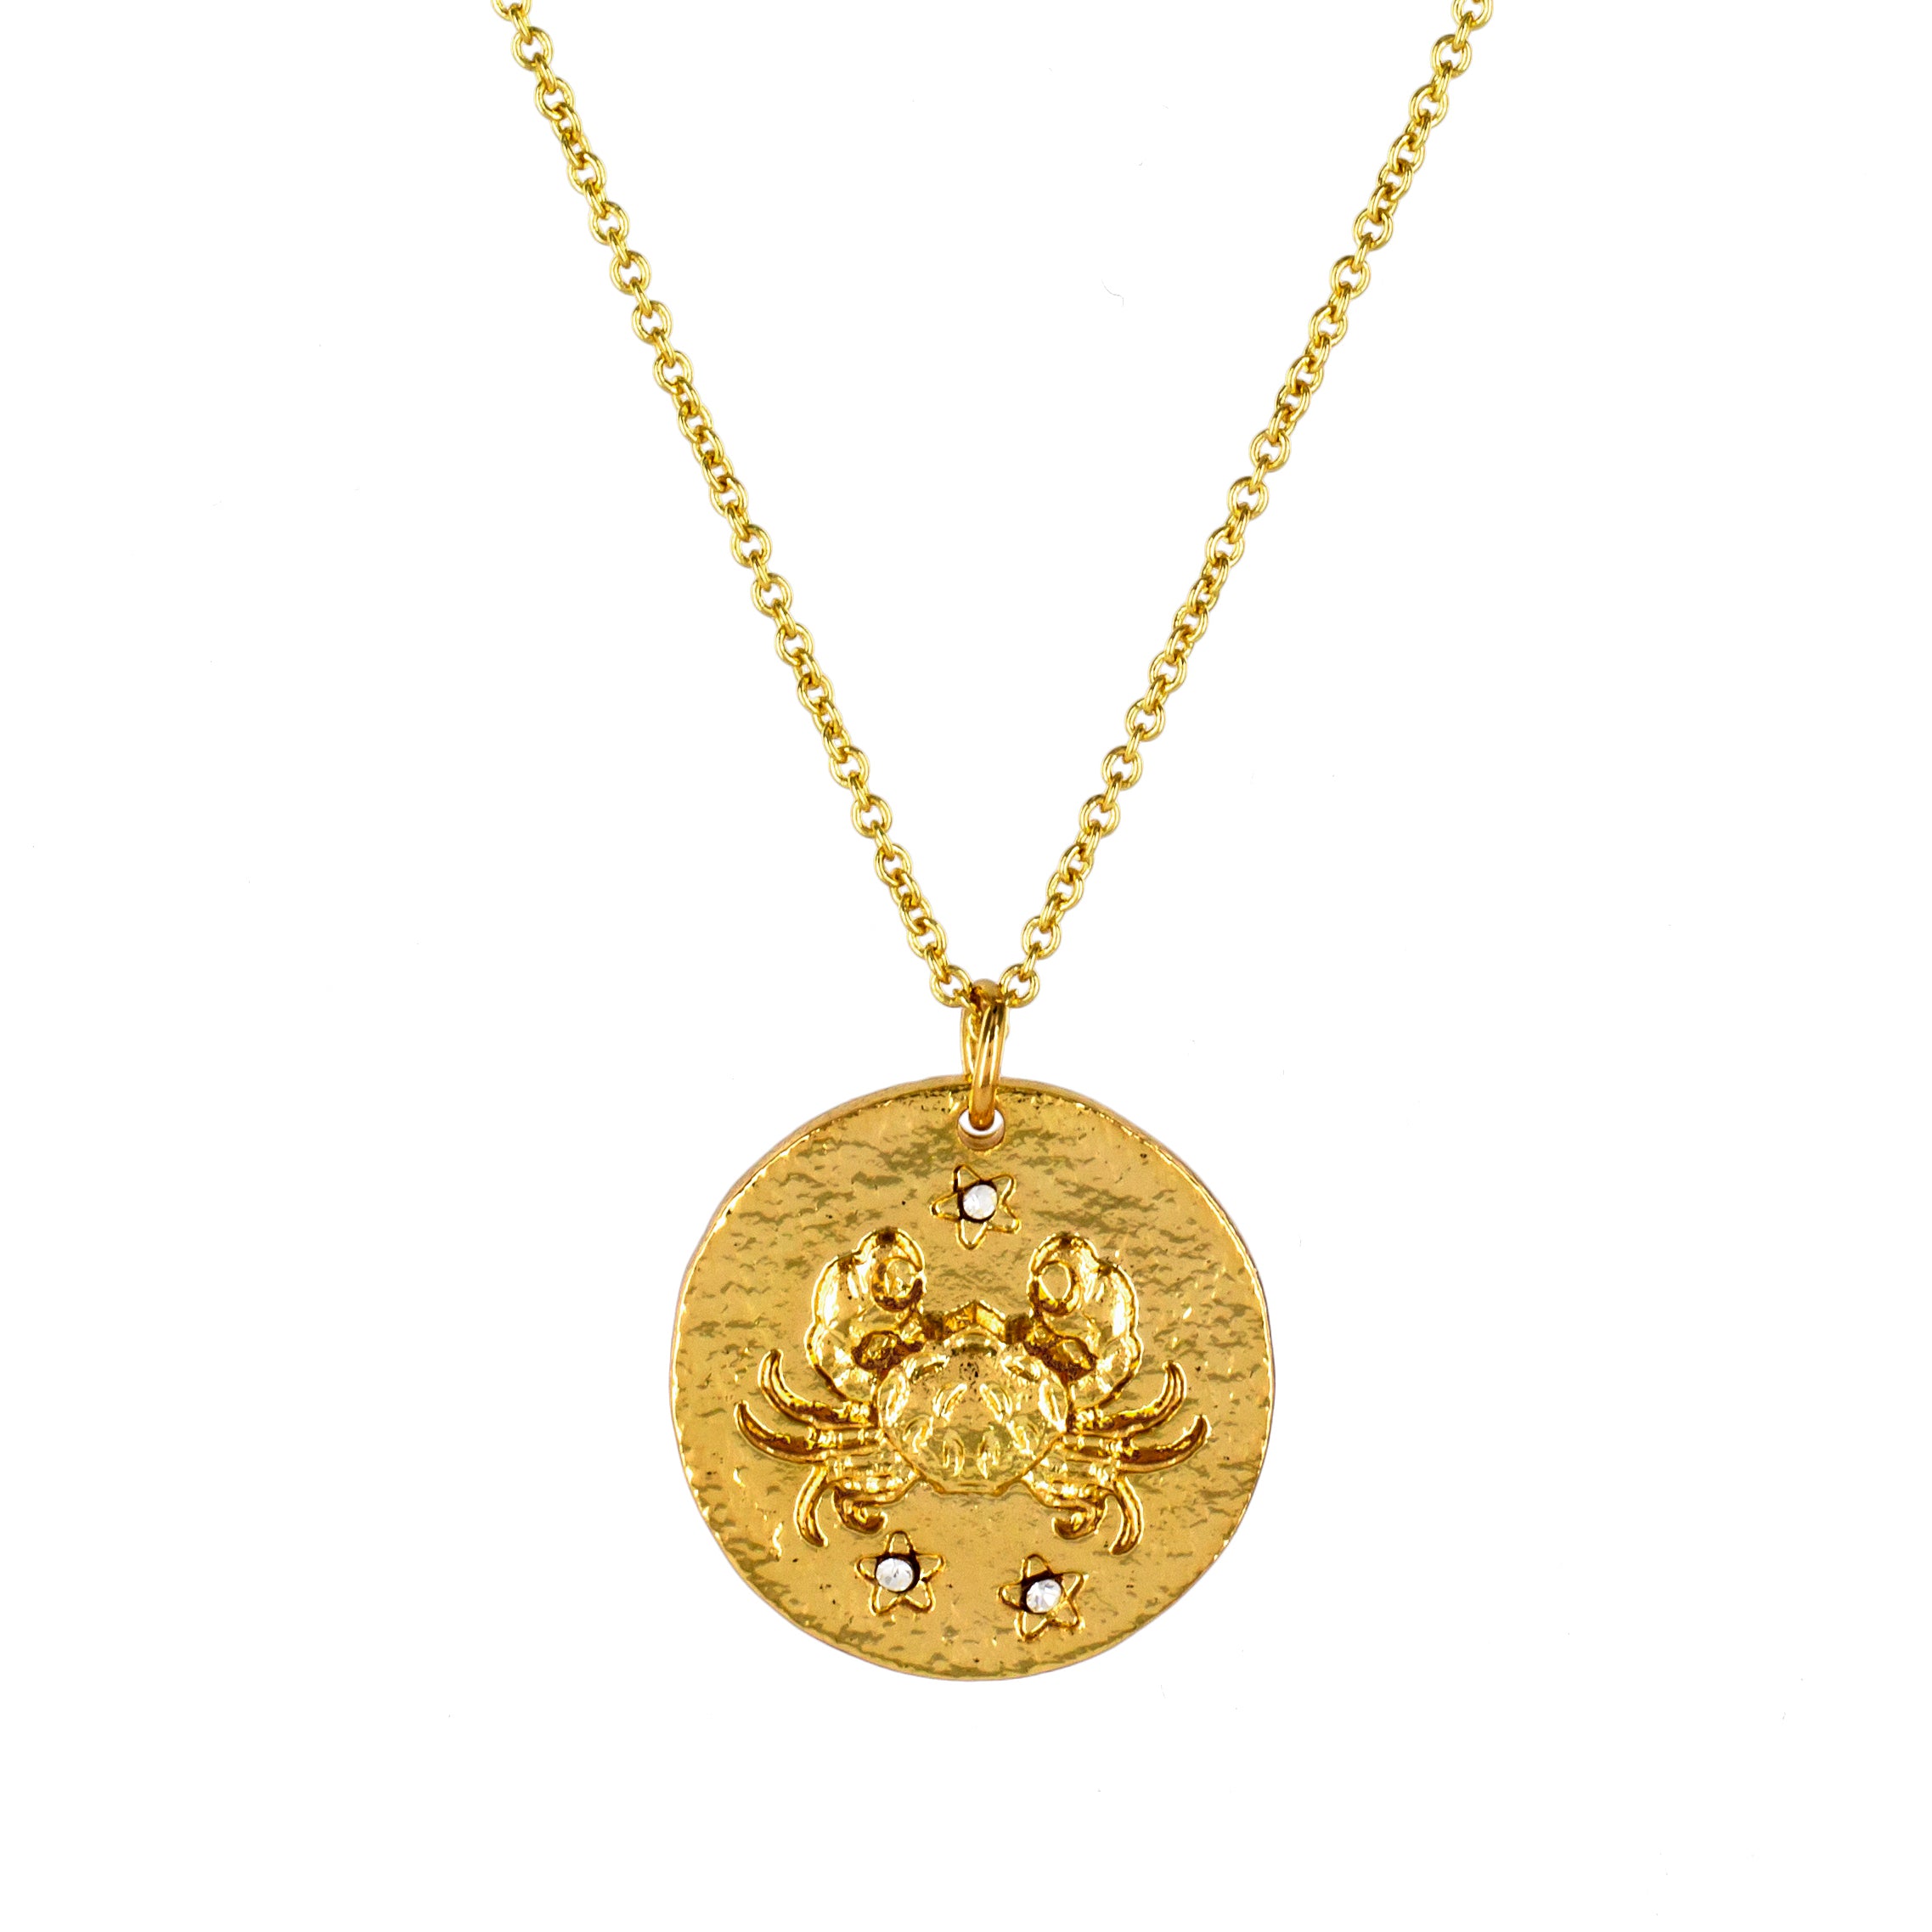 astrologie collier cancer- astrodisiac - bijoux - paris - claire naa - jewels - necklace cancer - astrology